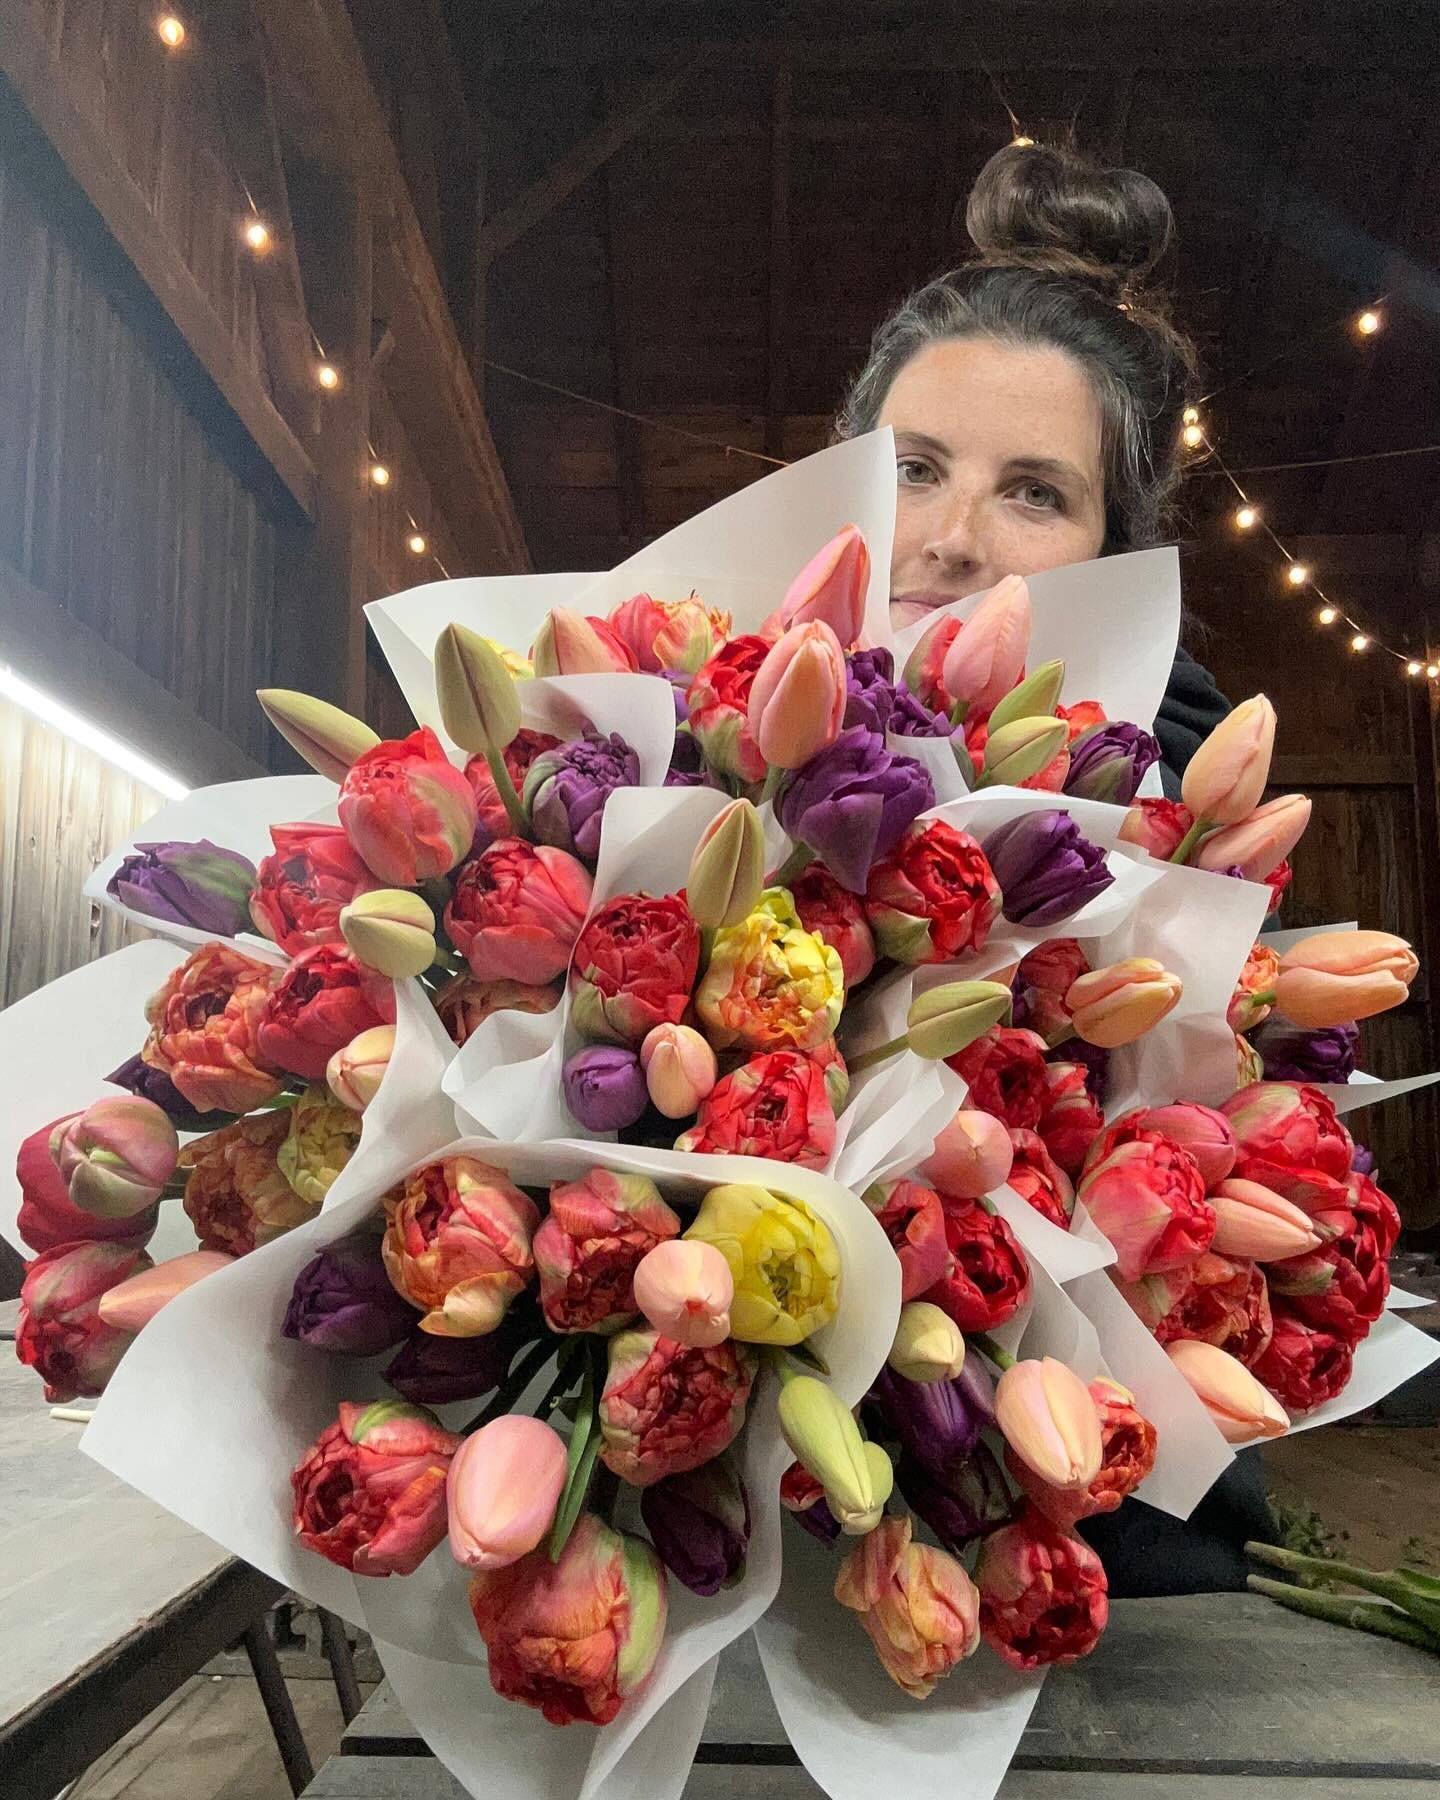 Week 2 subscriptions are on the stand this morning!

We&rsquo;ll be fully stocked all day with $25 Tulip bouquets!

🌸9320 Ramsdell
🌸Cash or Venmo 

✌🏼🩷🌸

#browersflowers #rockfordmi #rockfordmichigan #westmichiganflowers